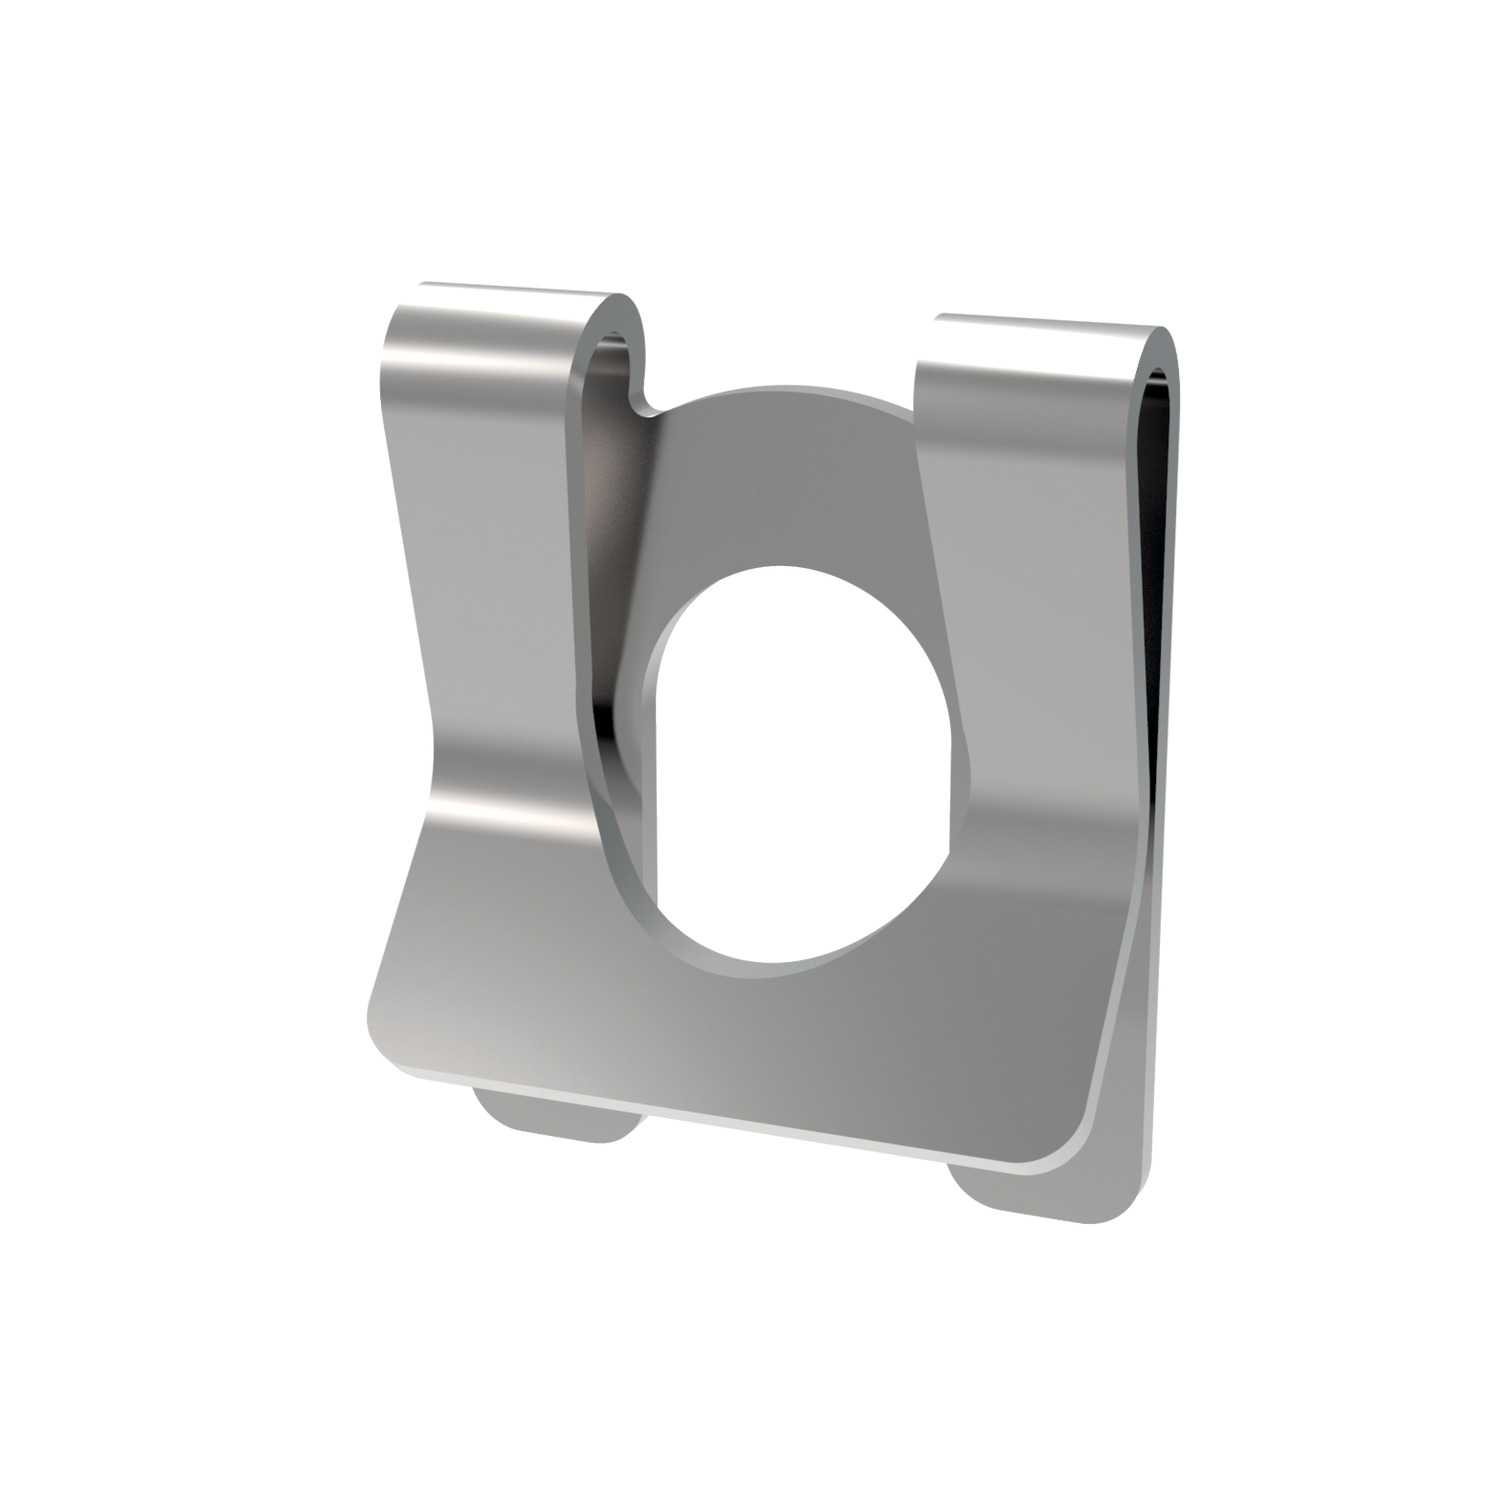 Product R3440, Safety Fastener (SLM) silver zinc plated / 